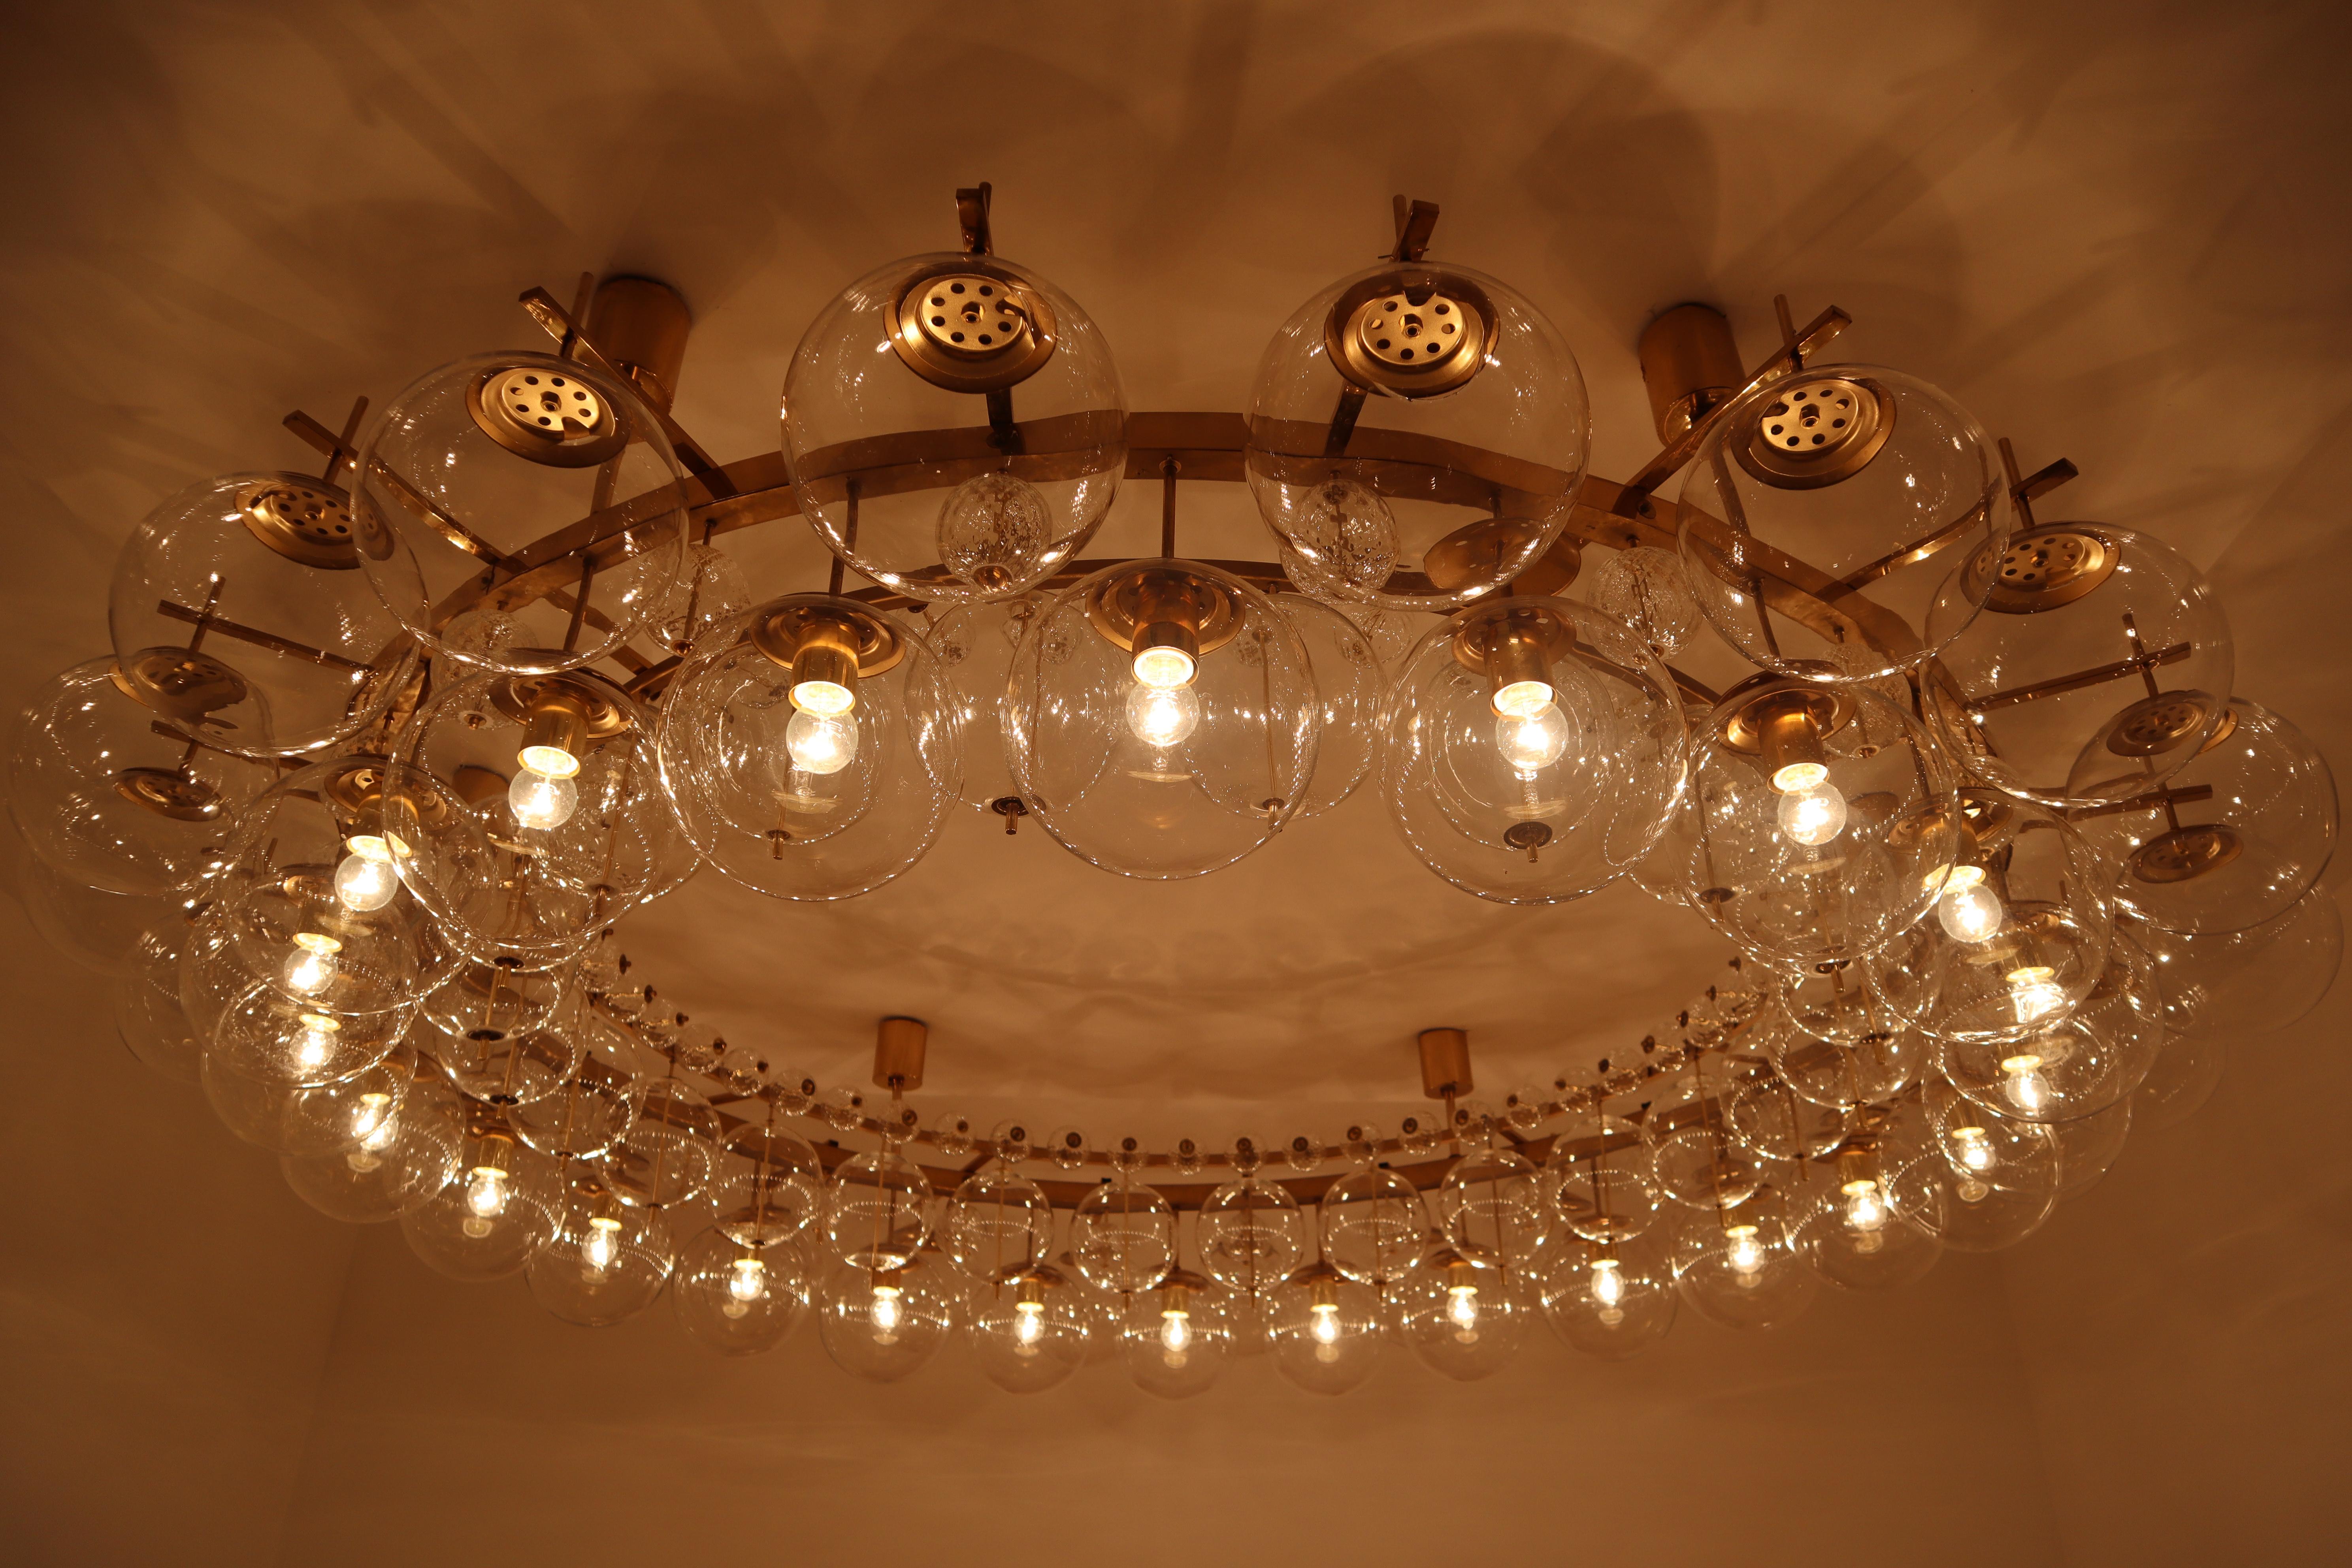 Two Extremely Large Hotel Chandeliers with Brass Fixture and Hand-Blowed Glass 10